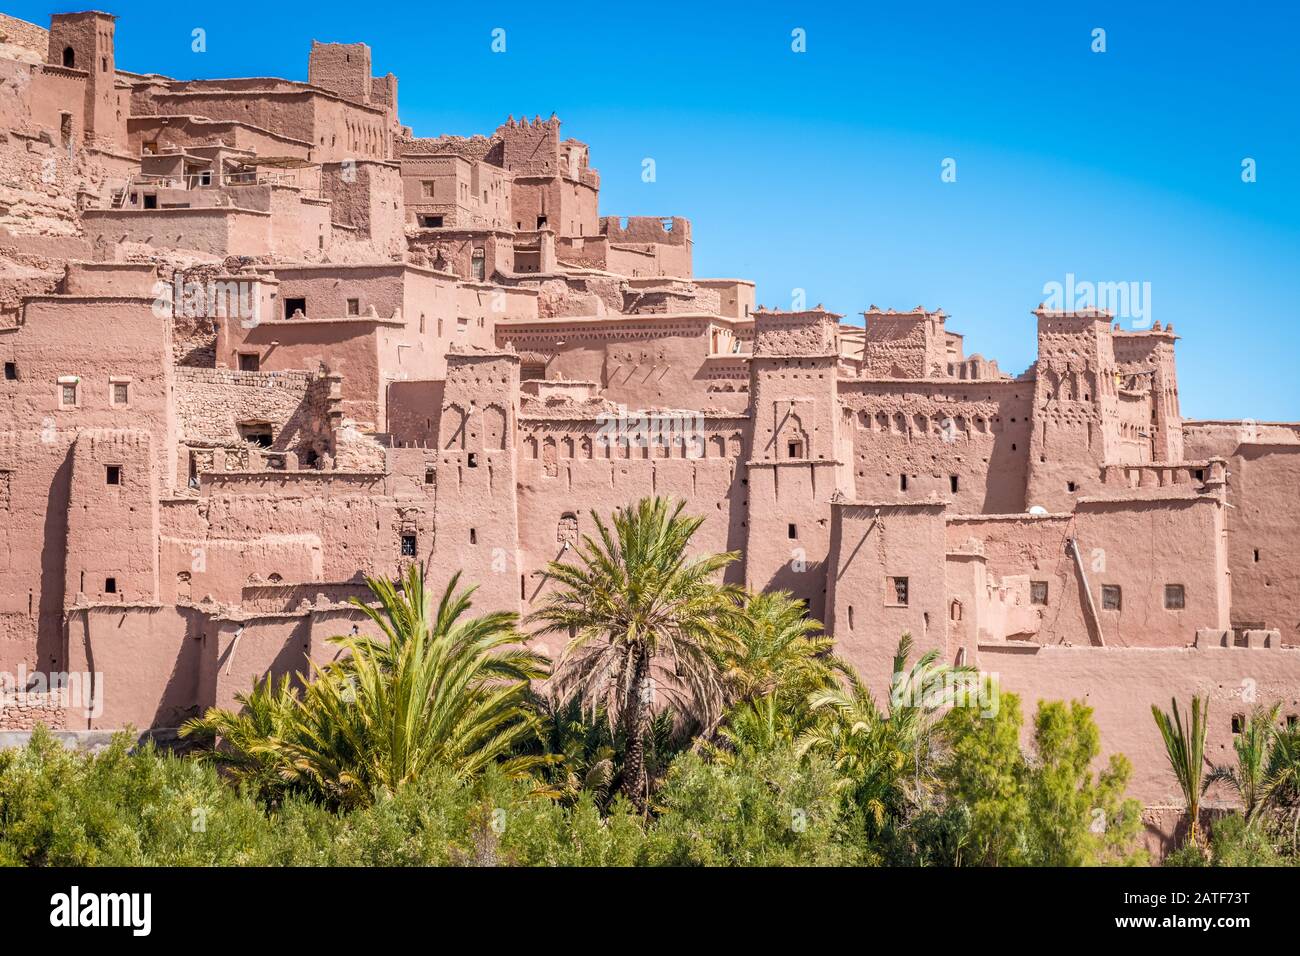 Fortified village and clay houses, Ait Benhaddou, Morocco Stock Photo